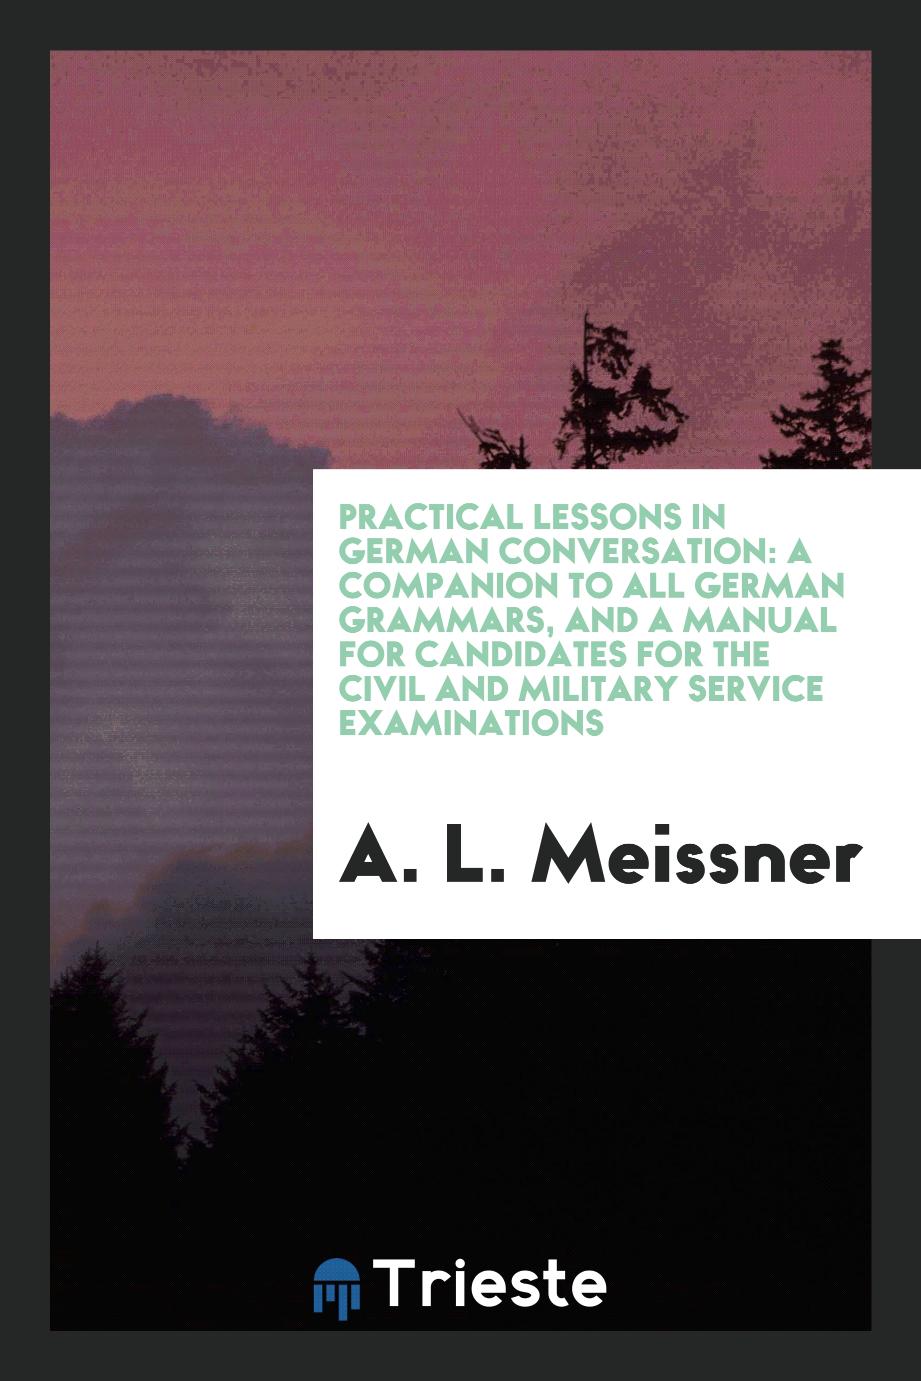 Practical Lessons in German Conversation: A Companion to All German Grammars, and a Manual for Candidates for the Civil and Military Service Examinations